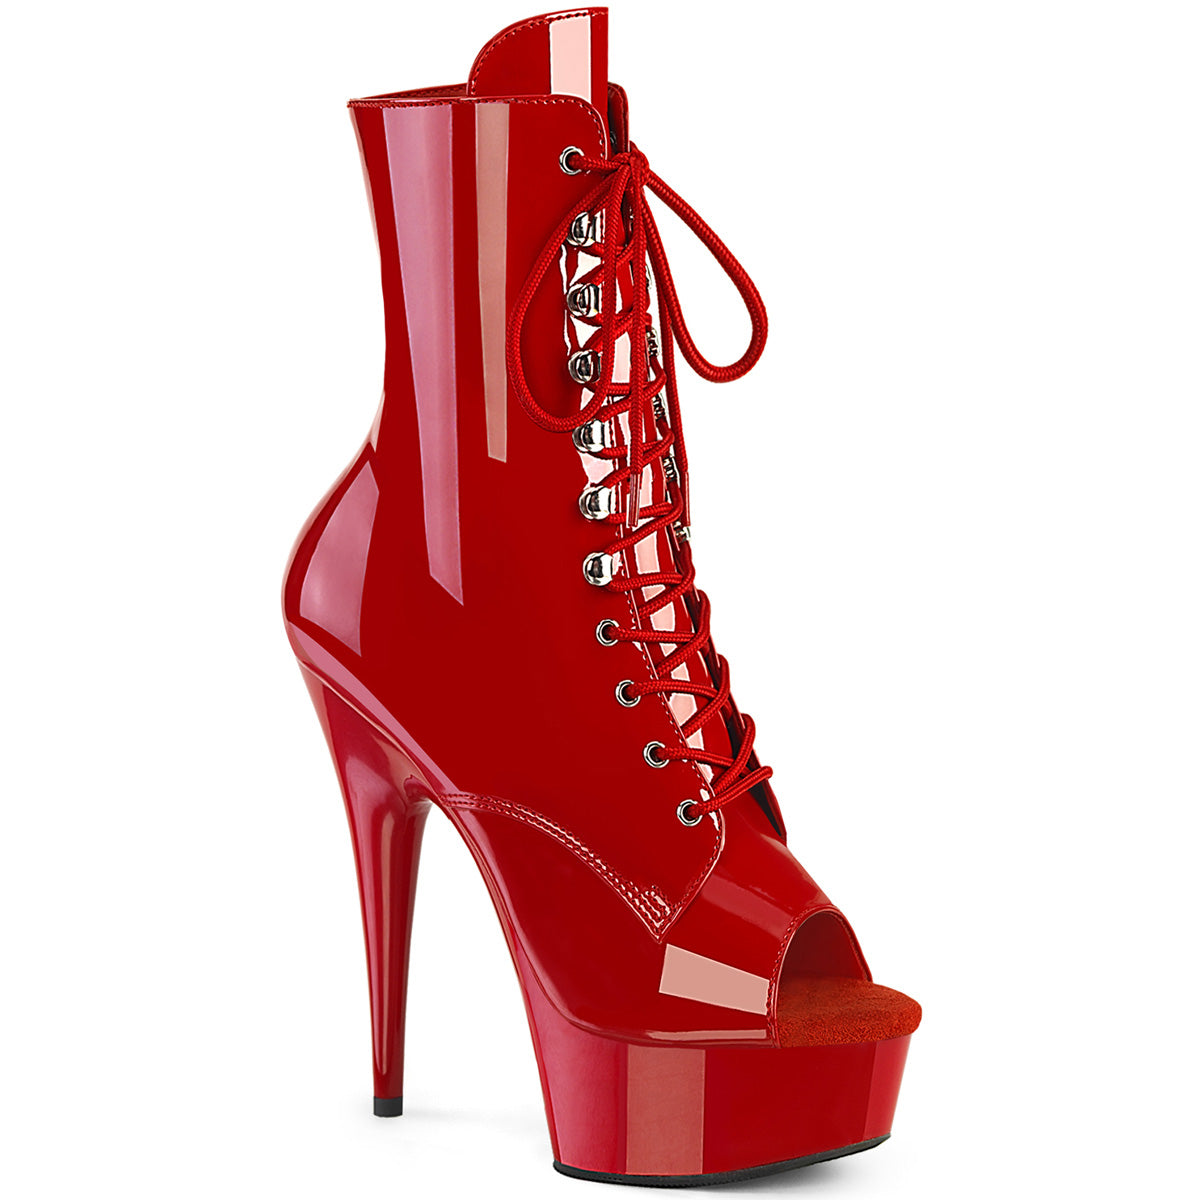 6 Inch Heel DELIGHT-1021 Red Patent